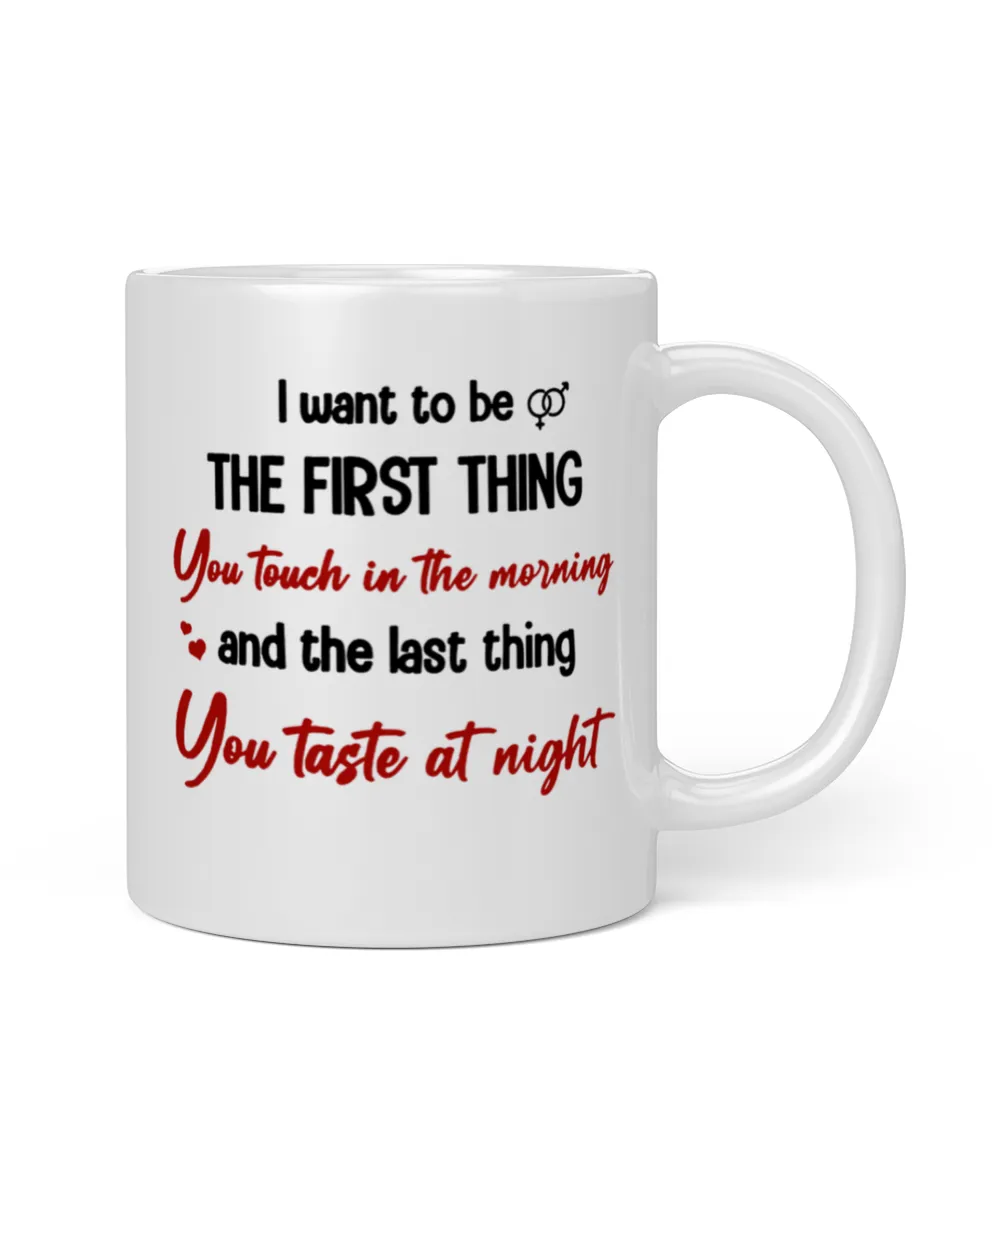 I Want To Be The First Thing You Touch In The Morning And The Last Thing You Taste At Night Valentine's Gift Fof Lover, For Boy Friend/Girl Friend, For Wife/Husband